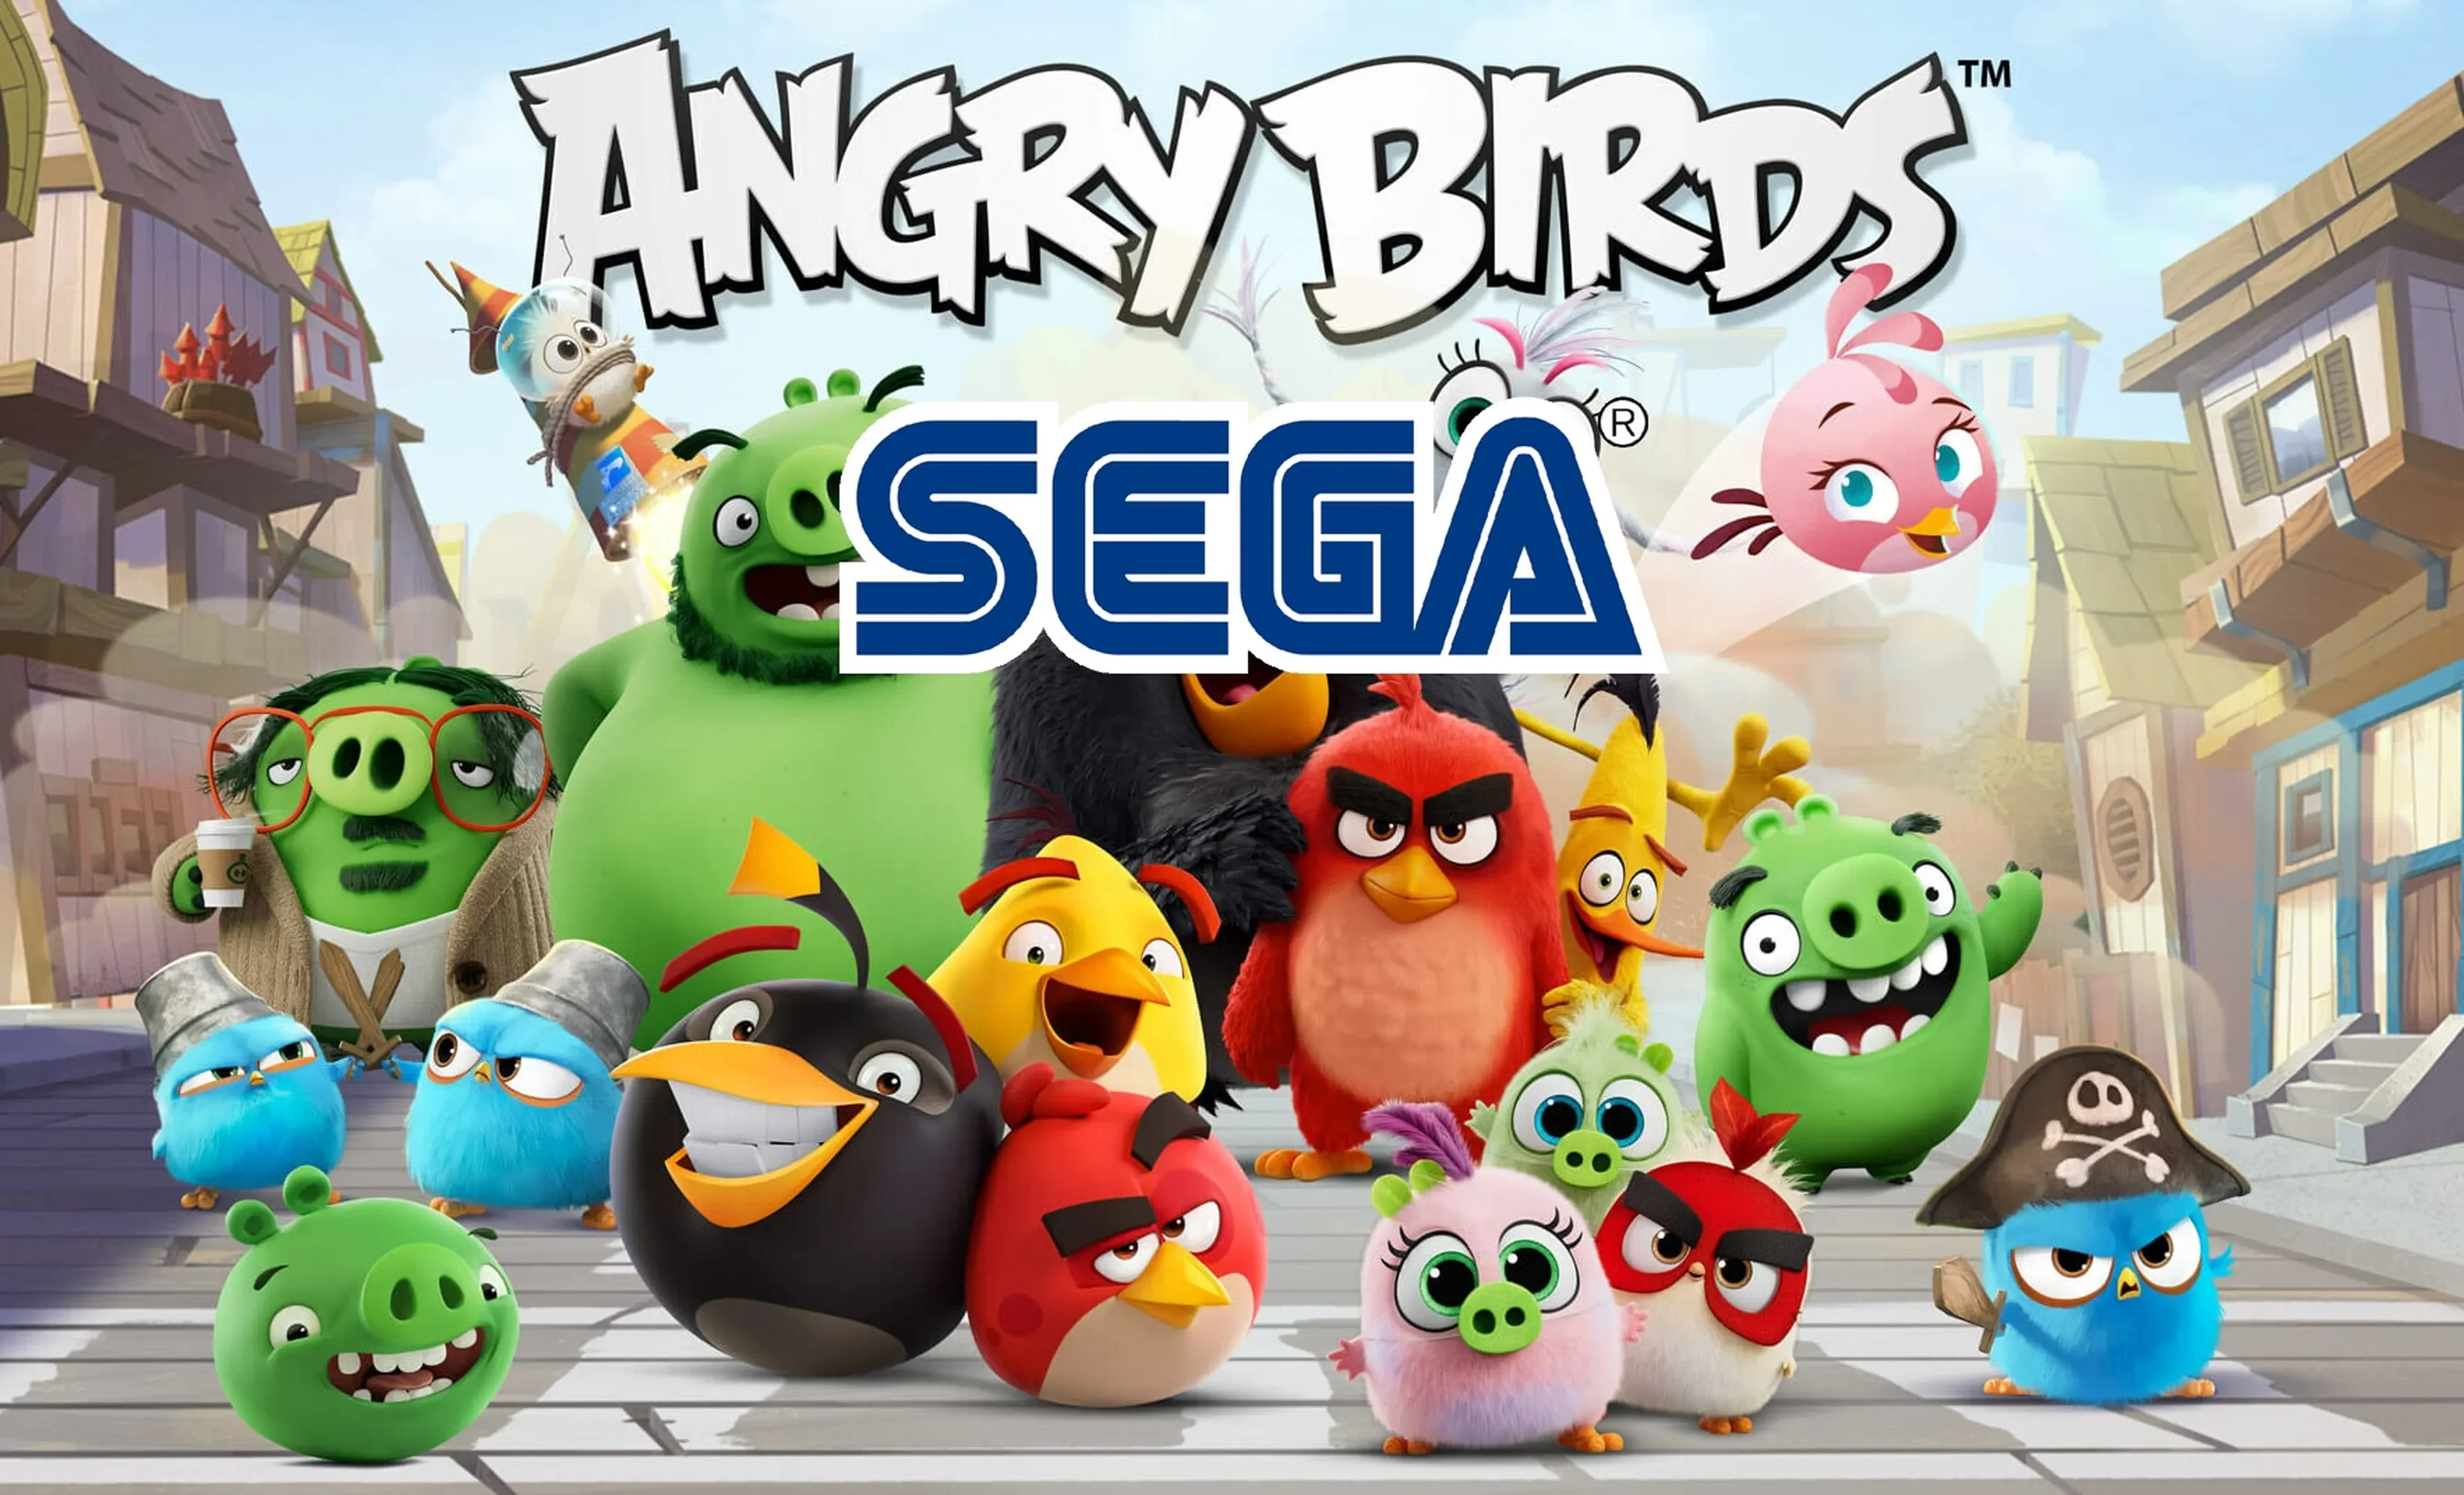 Sega intends to acquire Rovio, the studio that created the Angry Birds series